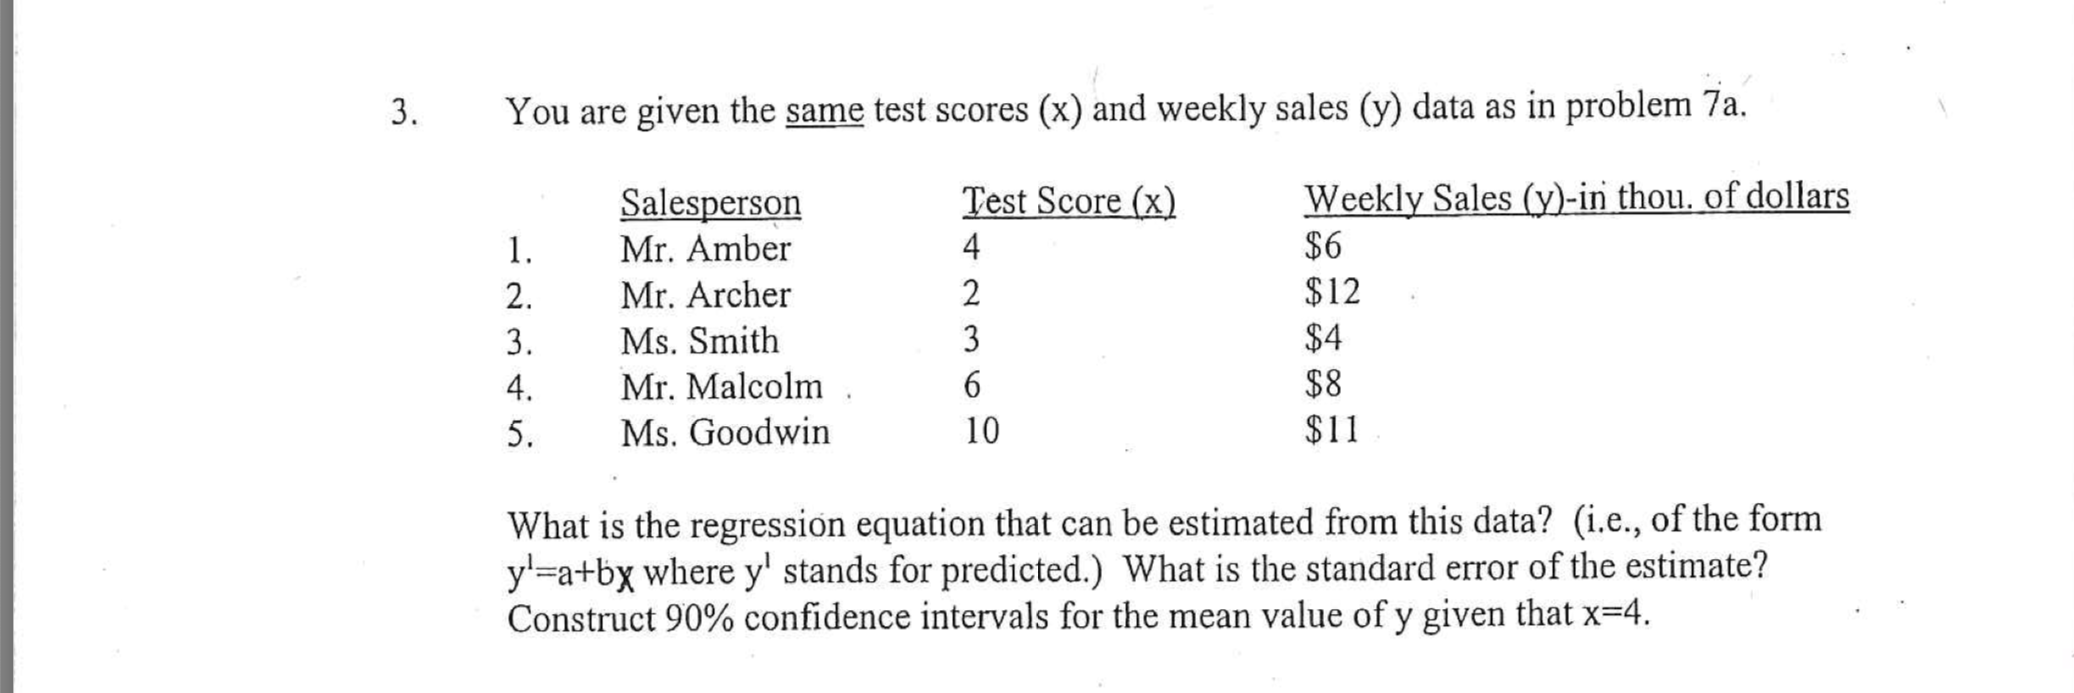 You are given the same test scores (x) and weekly sales (y) data as in problem 7a.
Weekly Sales (y)-in thou, of dollars
Salesperson
Mr. Amber
Test Score (x)
4
1.
$6
$12
$4
$8
2.
Mr. Archer
3
6
3.
Ms. Smith
4.
Mr. Malcolm
5.
Ms. Goodwin
$1
10
What is the regression equation that can be estimated from this data? (i.e., of the form
y'=a+bx where y' stands for predicted.) What is the standard error of the estimate?
Construct 90% confidence intervals for the mean value of y given that x=4.
